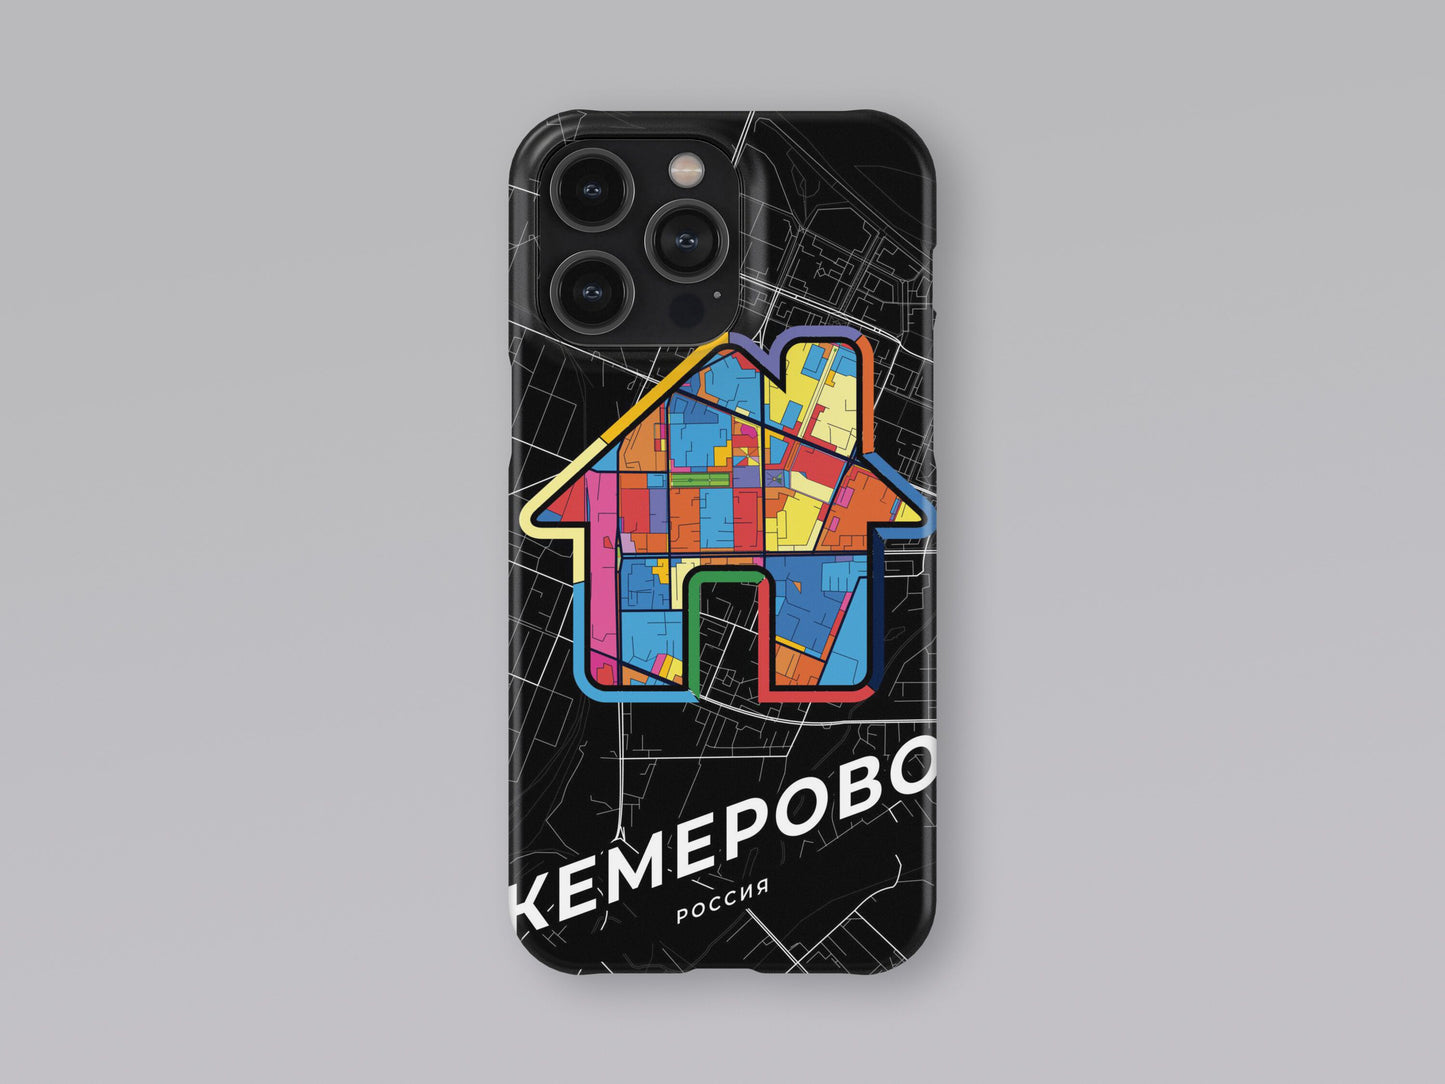 Kemerovo Russia slim phone case with colorful icon. Birthday, wedding or housewarming gift. Couple match cases. 3